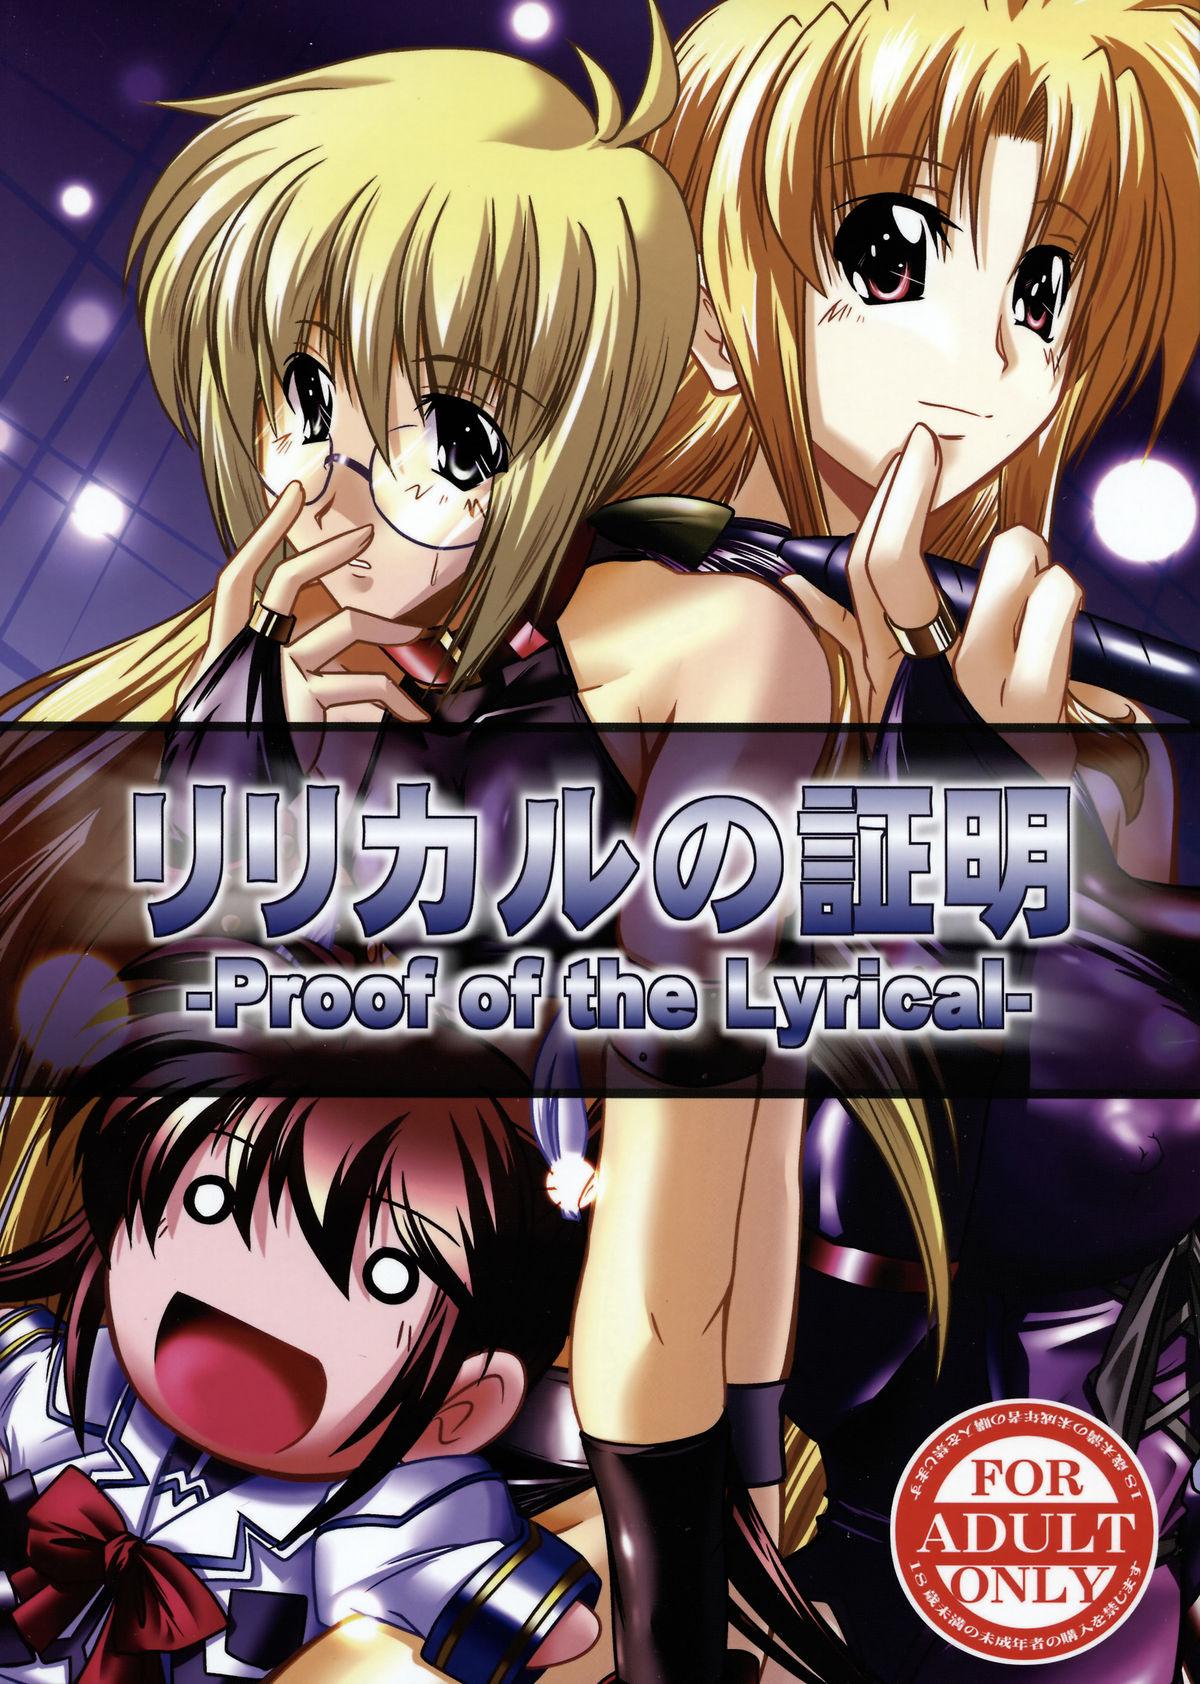 Chat Lyrical no Shoumei - Proof of the Lyrical - Mahou shoujo lyrical nanoha Best Blow Jobs Ever - Page 1